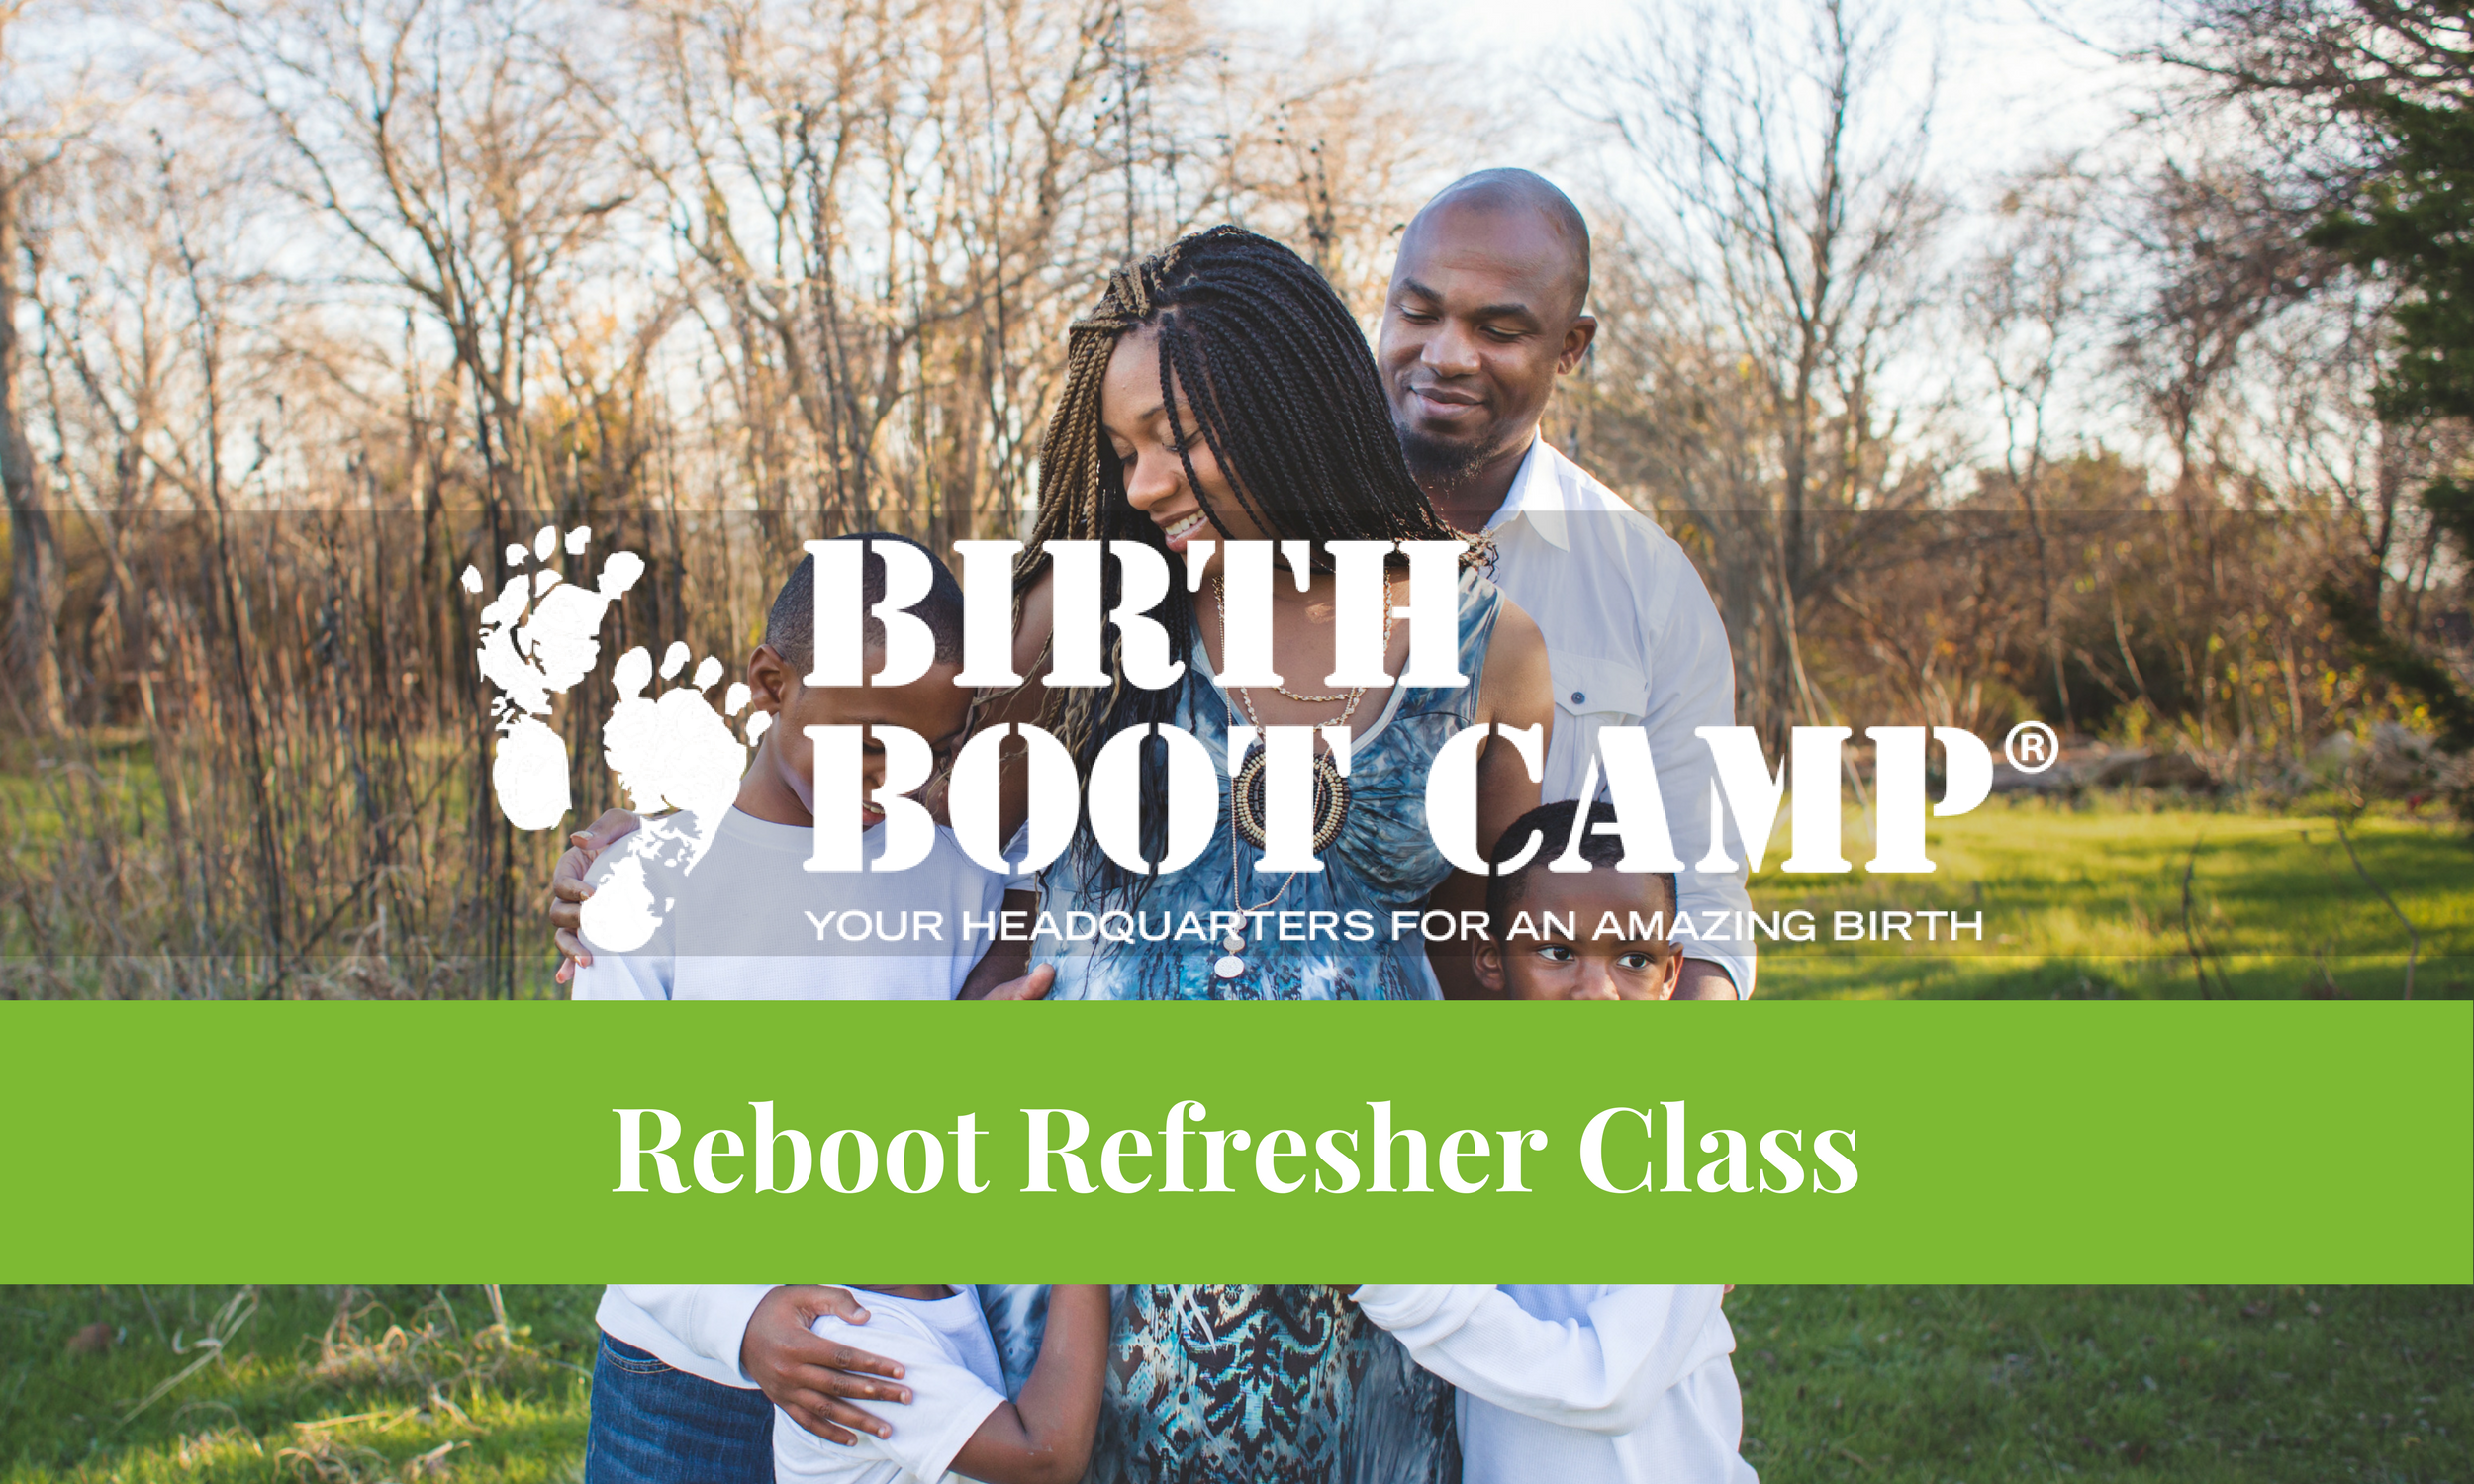 Birth Boot Camp Reboot Refresher Online Class